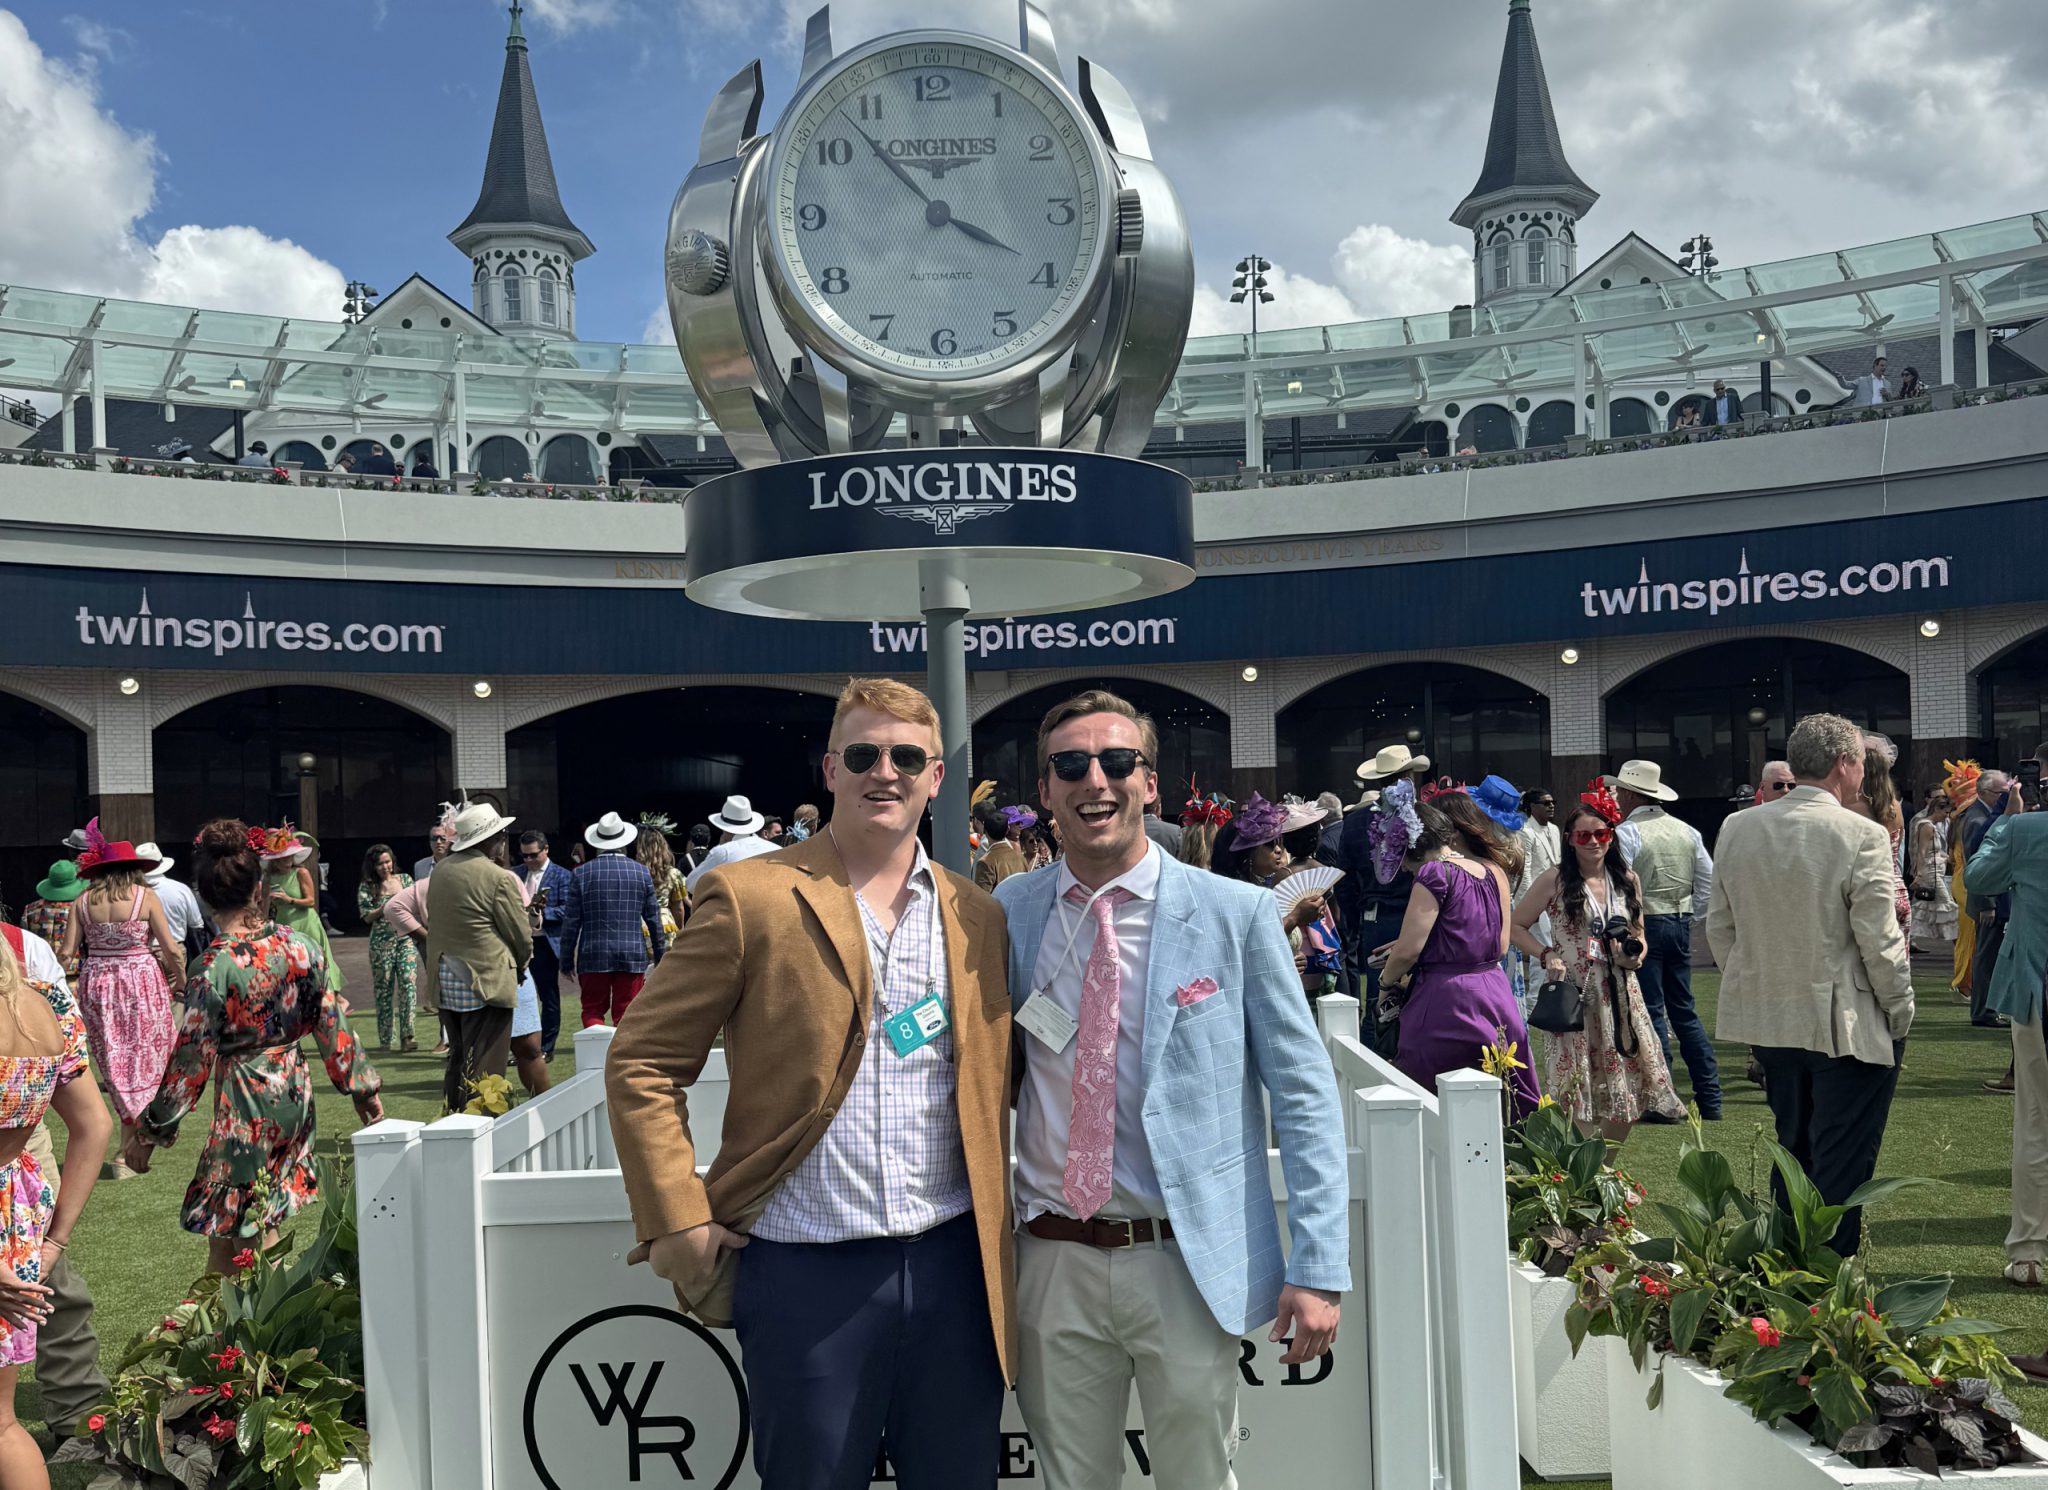 How I brought five young people to their first Kentucky Derby